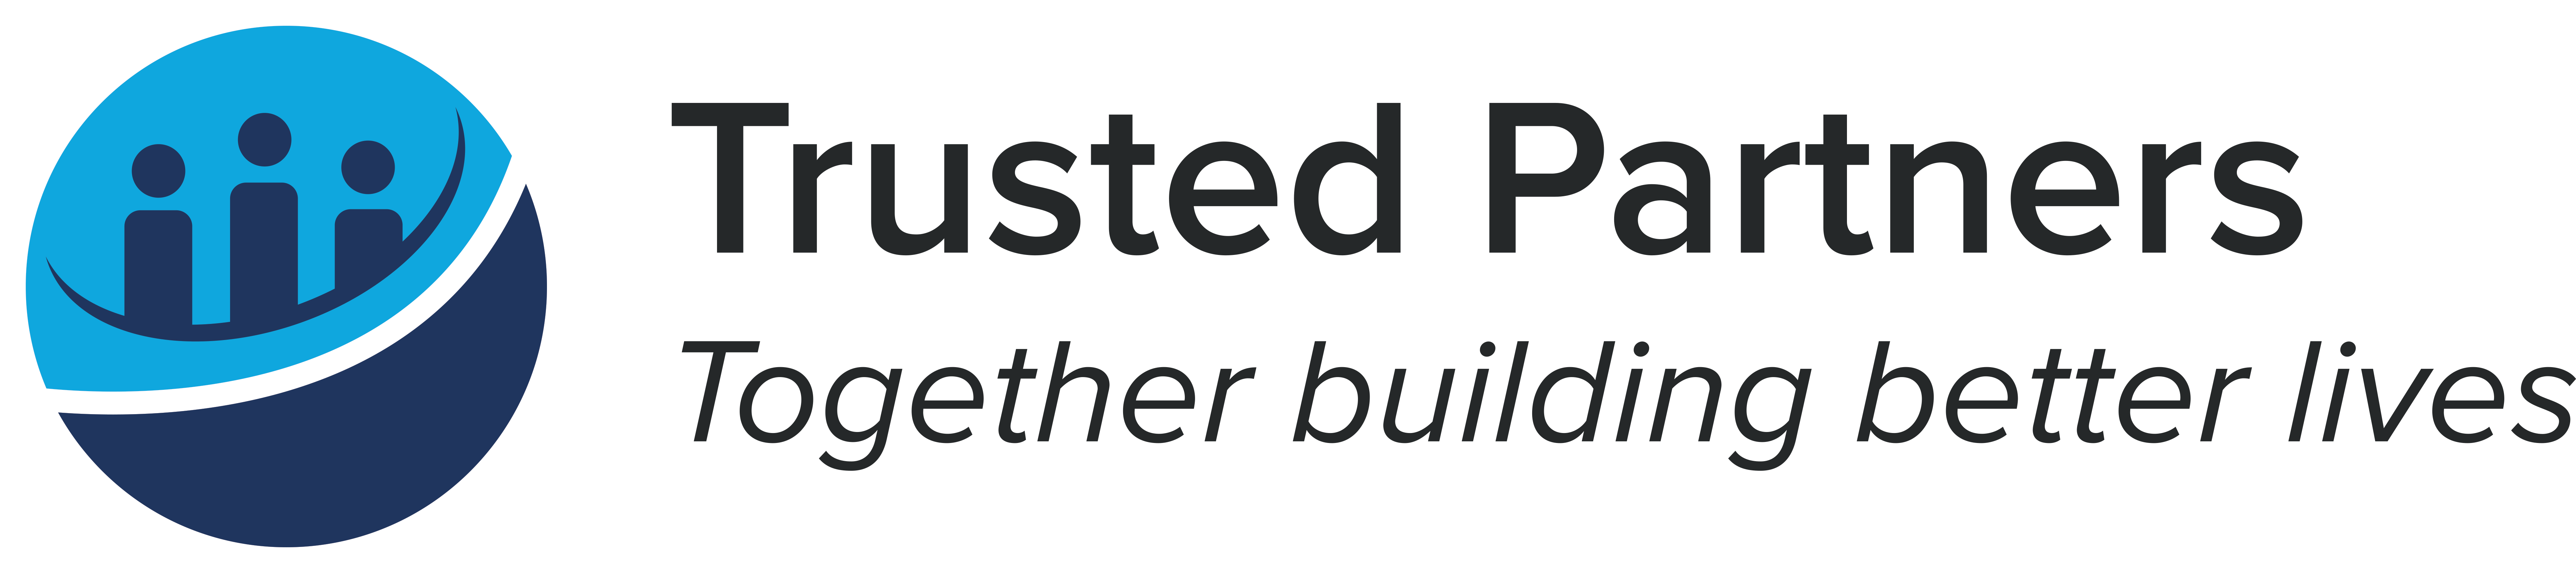 Trusted Partners logo, text 'together building better lives'